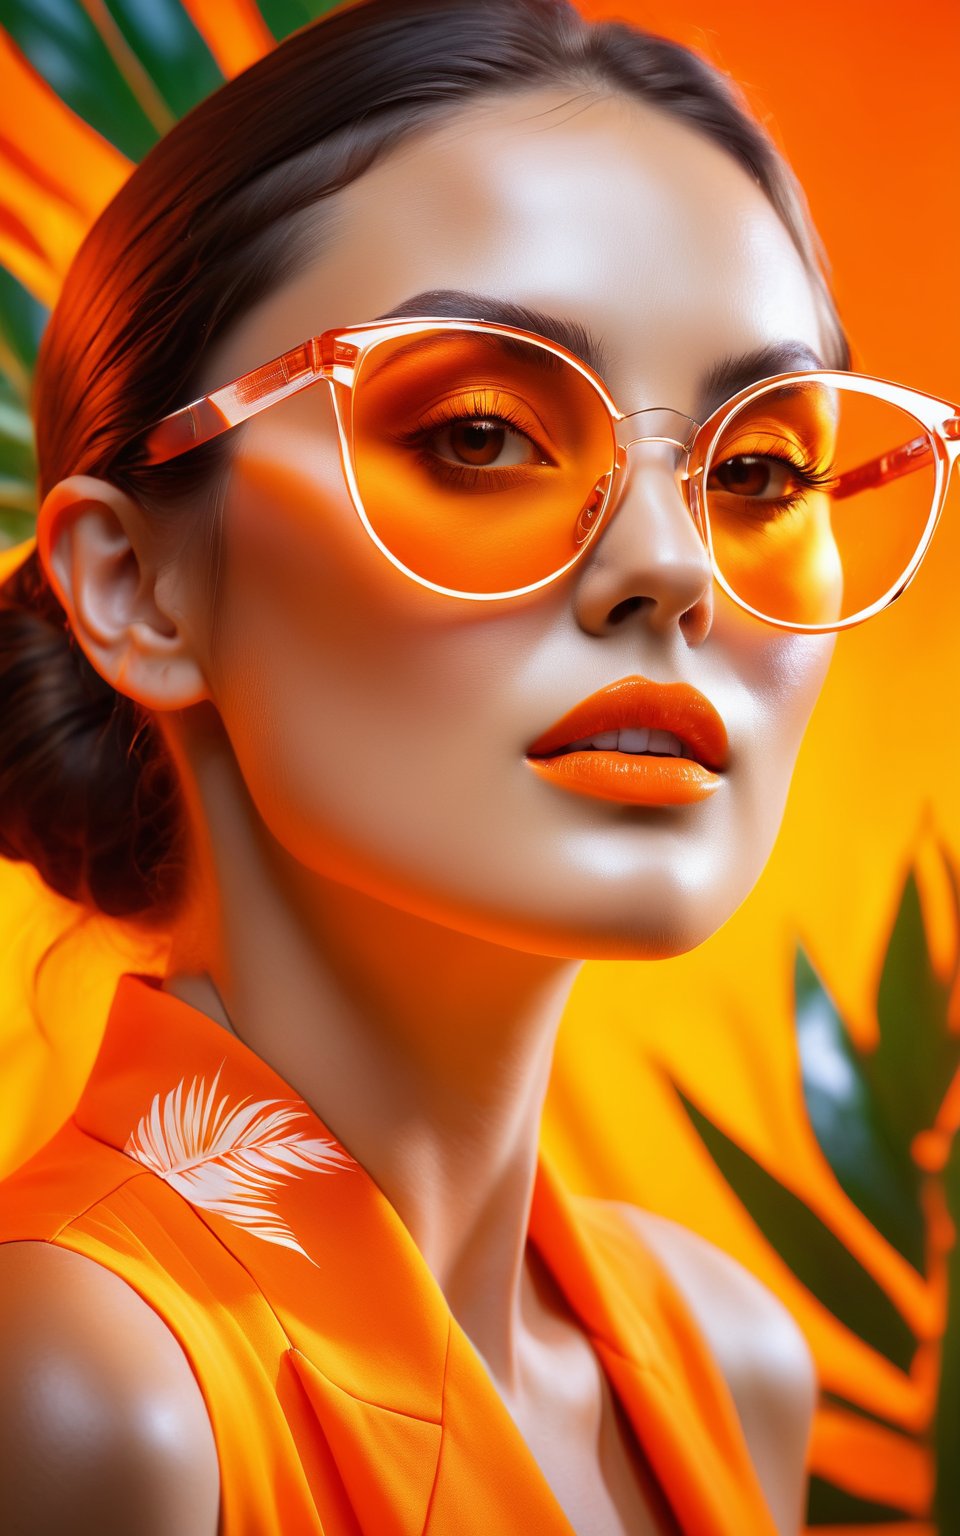 (best quality, 4K, 8K, high-resolution, masterpiece, ultra-detailed, photorealistic), double exposure effect, woman with glasses, vibrant orange background, tropical theme, surreal and artistic composition, glowing and reflective glasses, high contrast, dynamic lighting, ethereal ambiance.